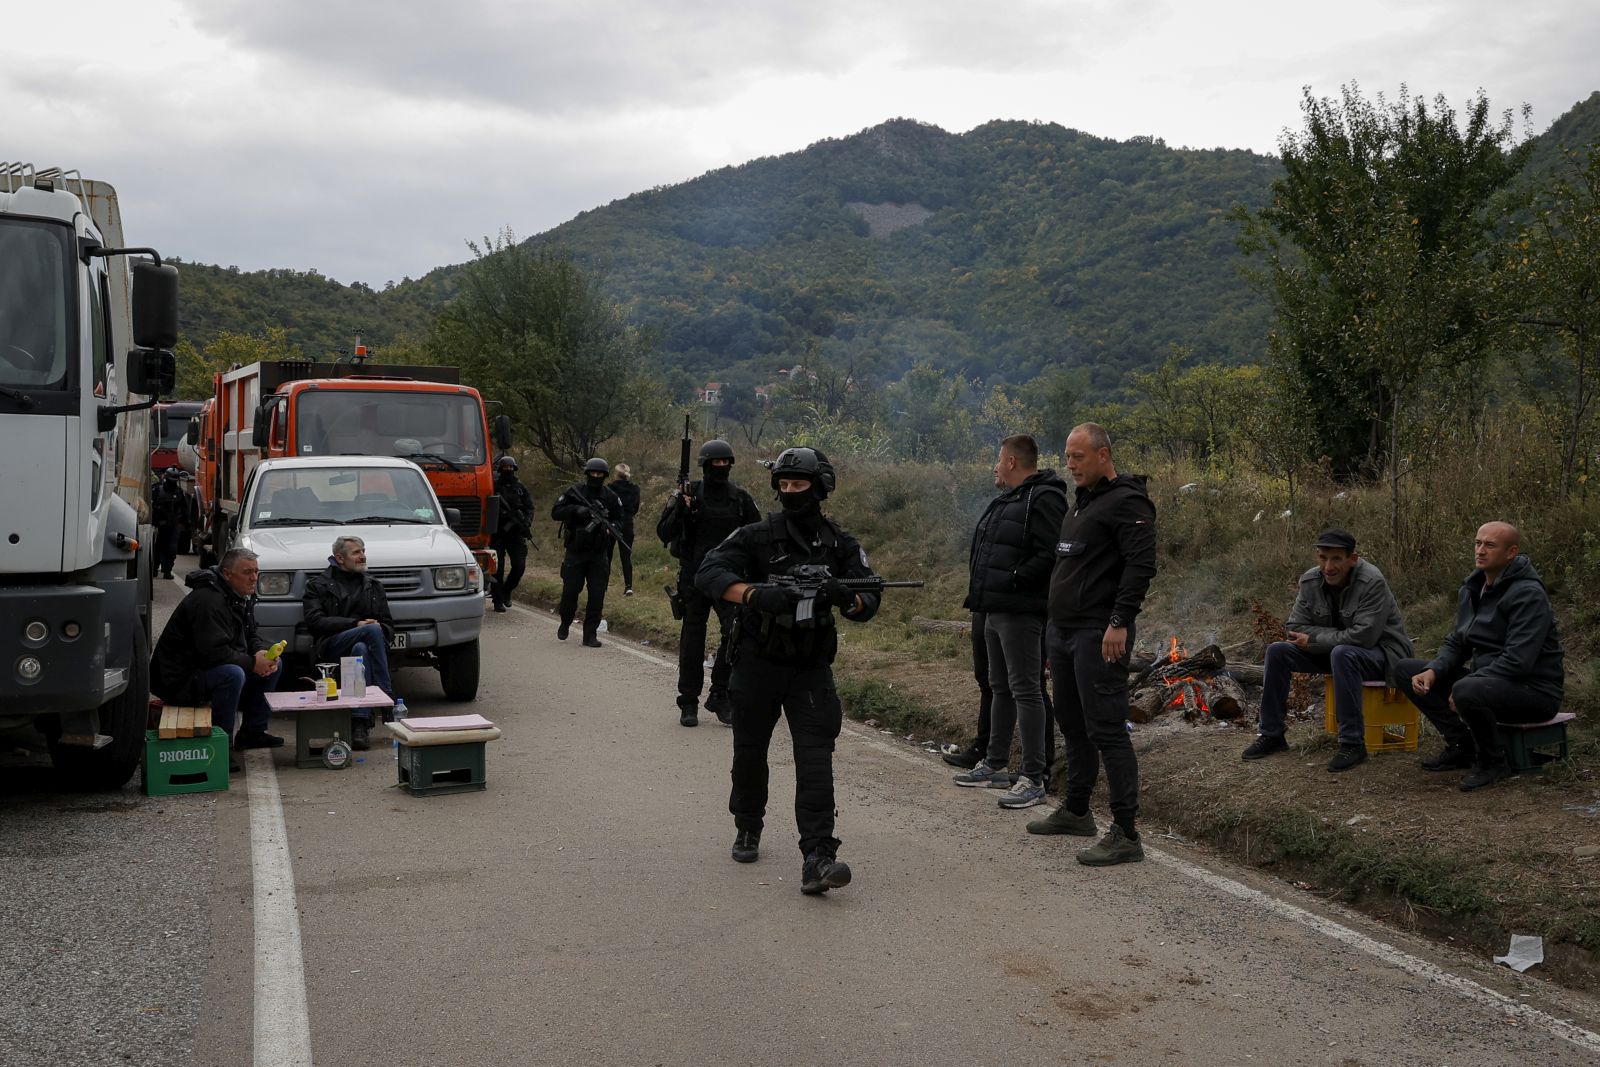 epa09481712 Kosovo Police Special Operations Unit patrol the area near the border crossing between Kosovo and Serbia in Jarinje, Kosovo, 22 September 2021. Kosovo Serbs in the northern part of the ethnically divided town of Mitrovica set up road barricades with trucks and cars to protest against the Kosovo government’s entry ban on vehicles with Serbian registration plates.  EPA/VALDRIN XHEMAJ